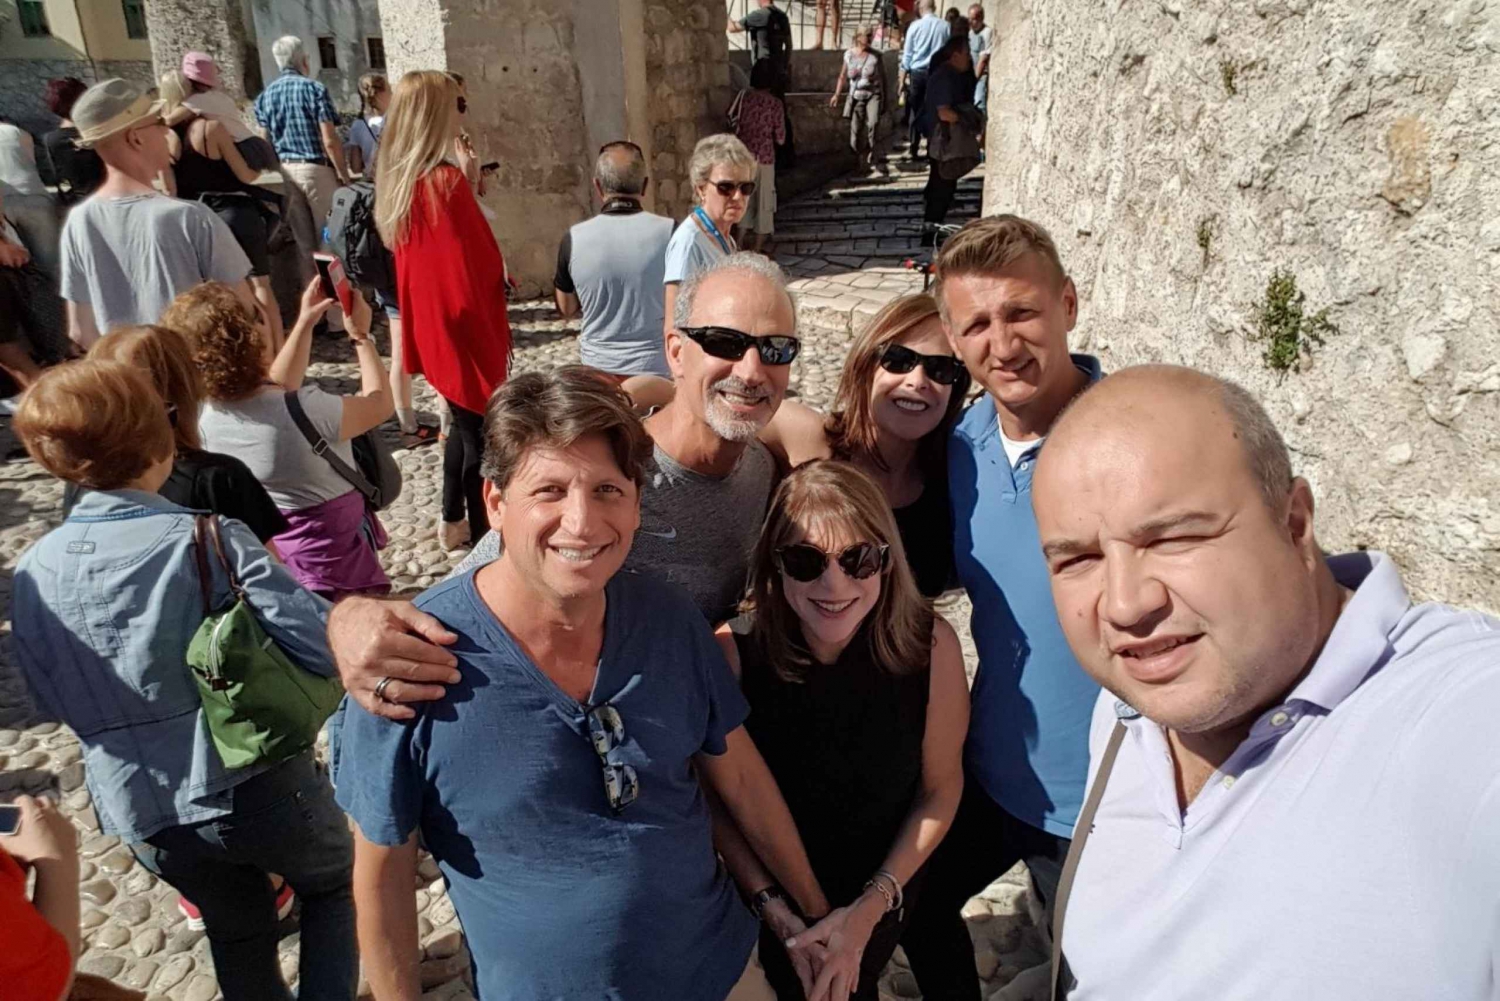 Dubrovnik, Mostar and Split: Private Tour with Lunch